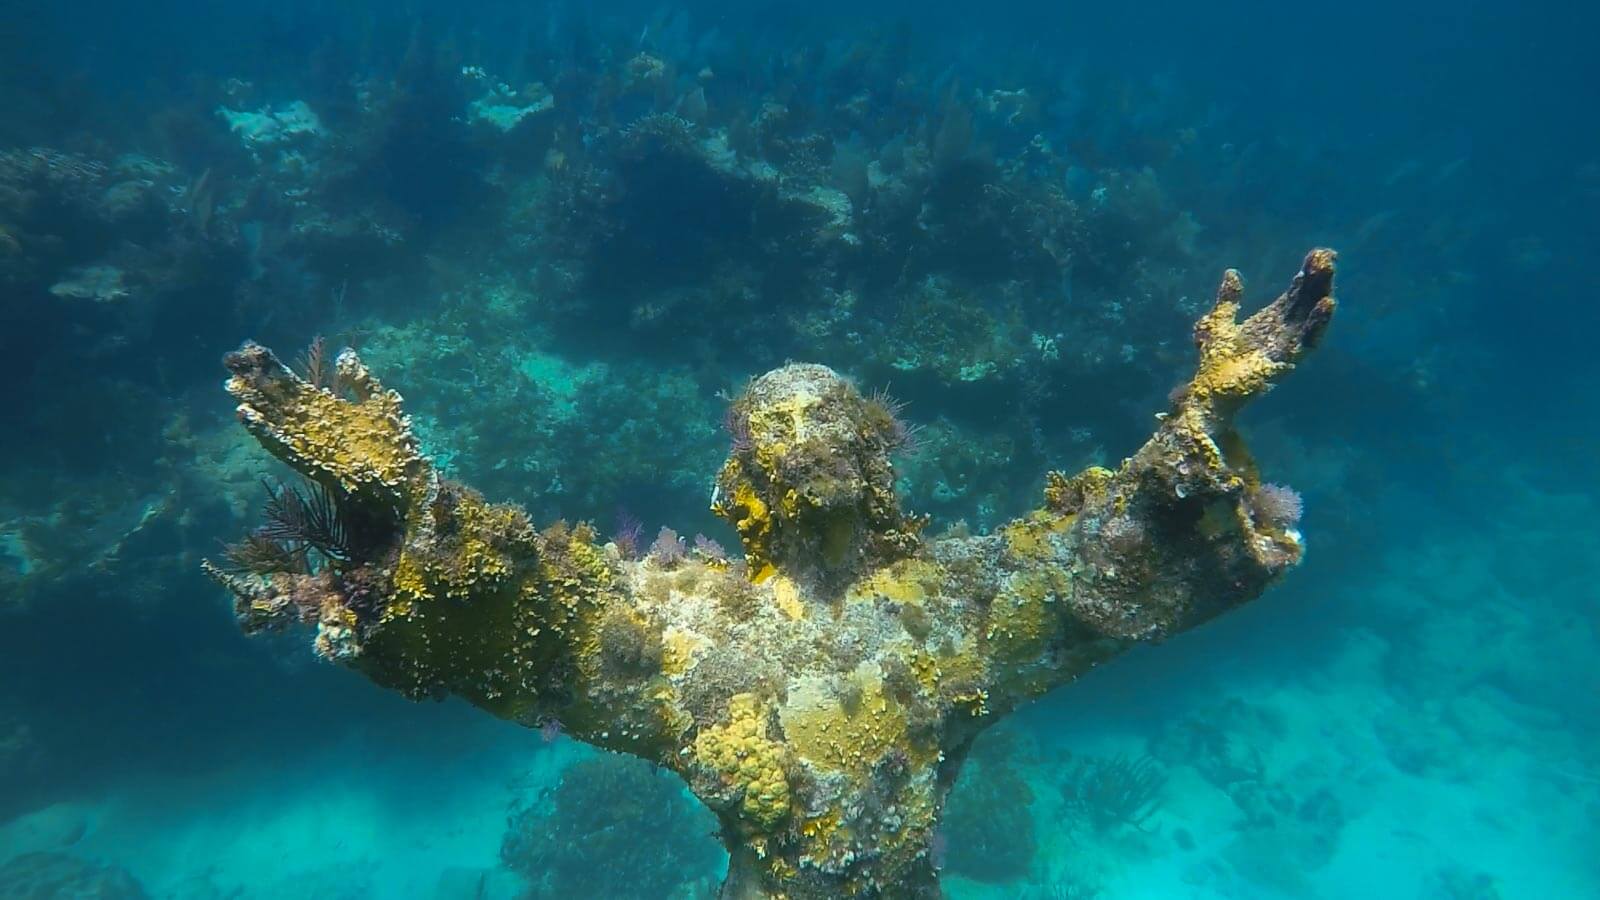 Underwater Christ of the Abyss at John Pennekamp Coral Reef State Park snorkeling tour